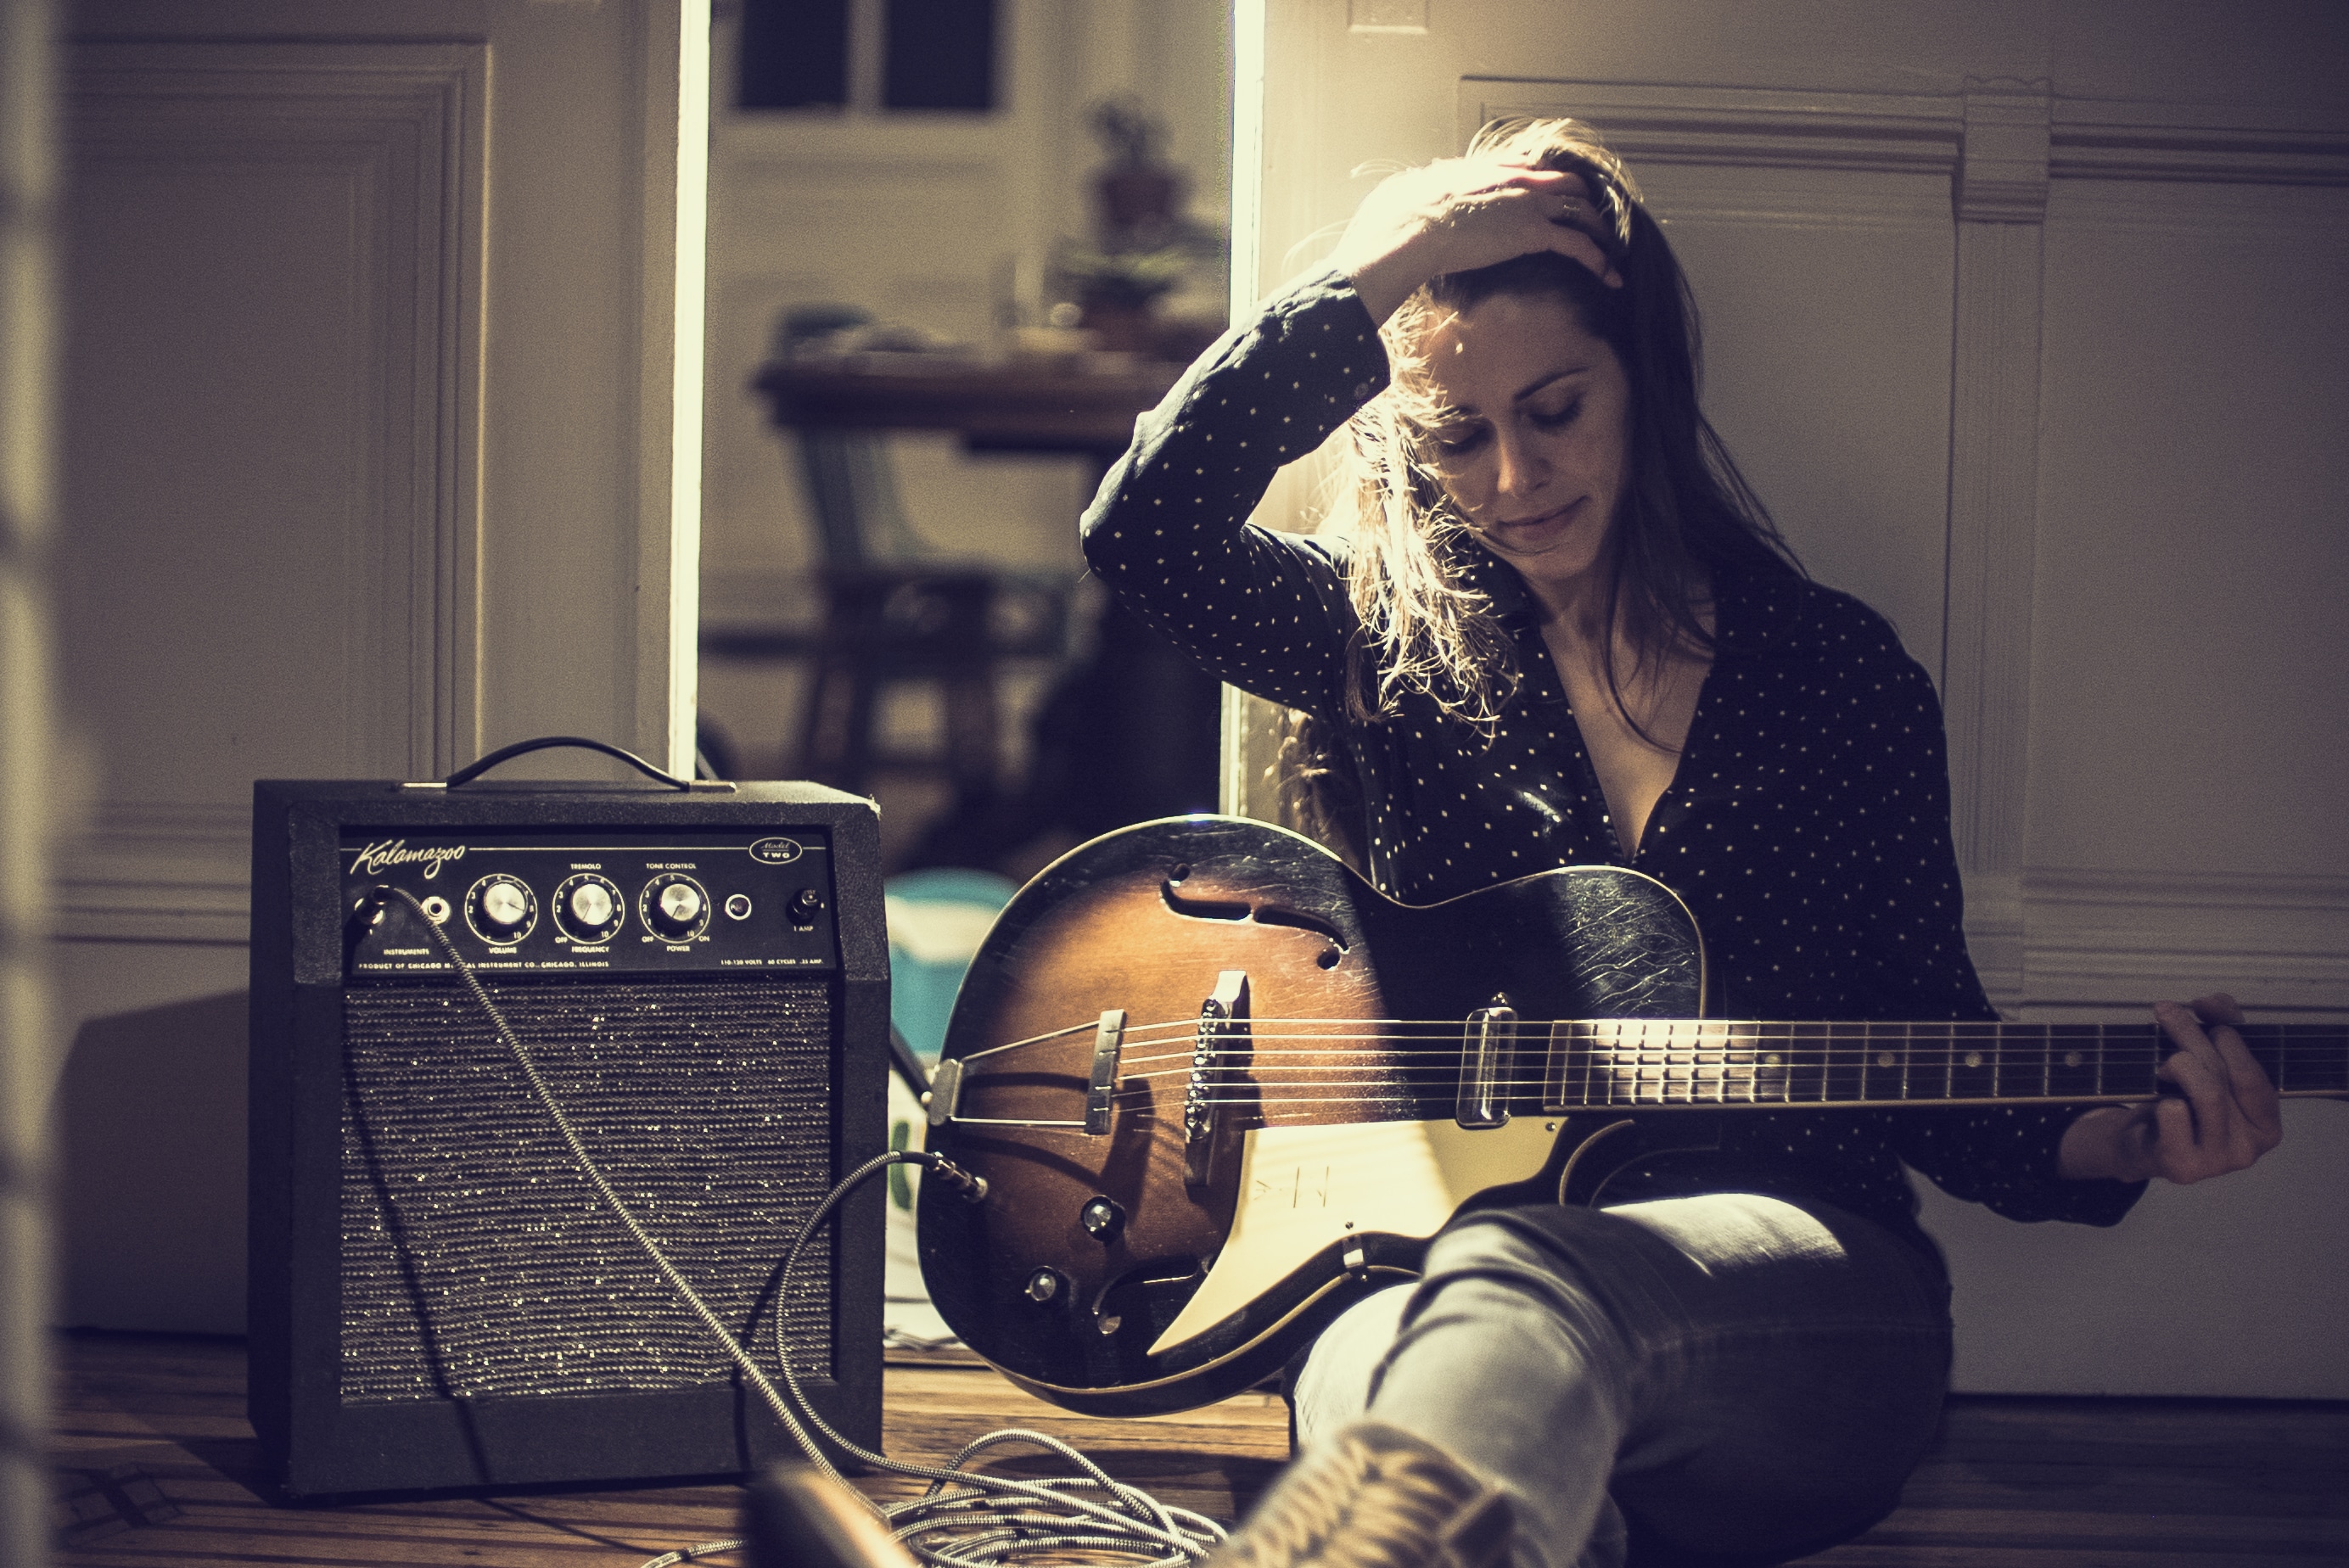 Vermont Native Caitlin Canty Brings Her Plaintive, Haunting Sound to Folk Alliance